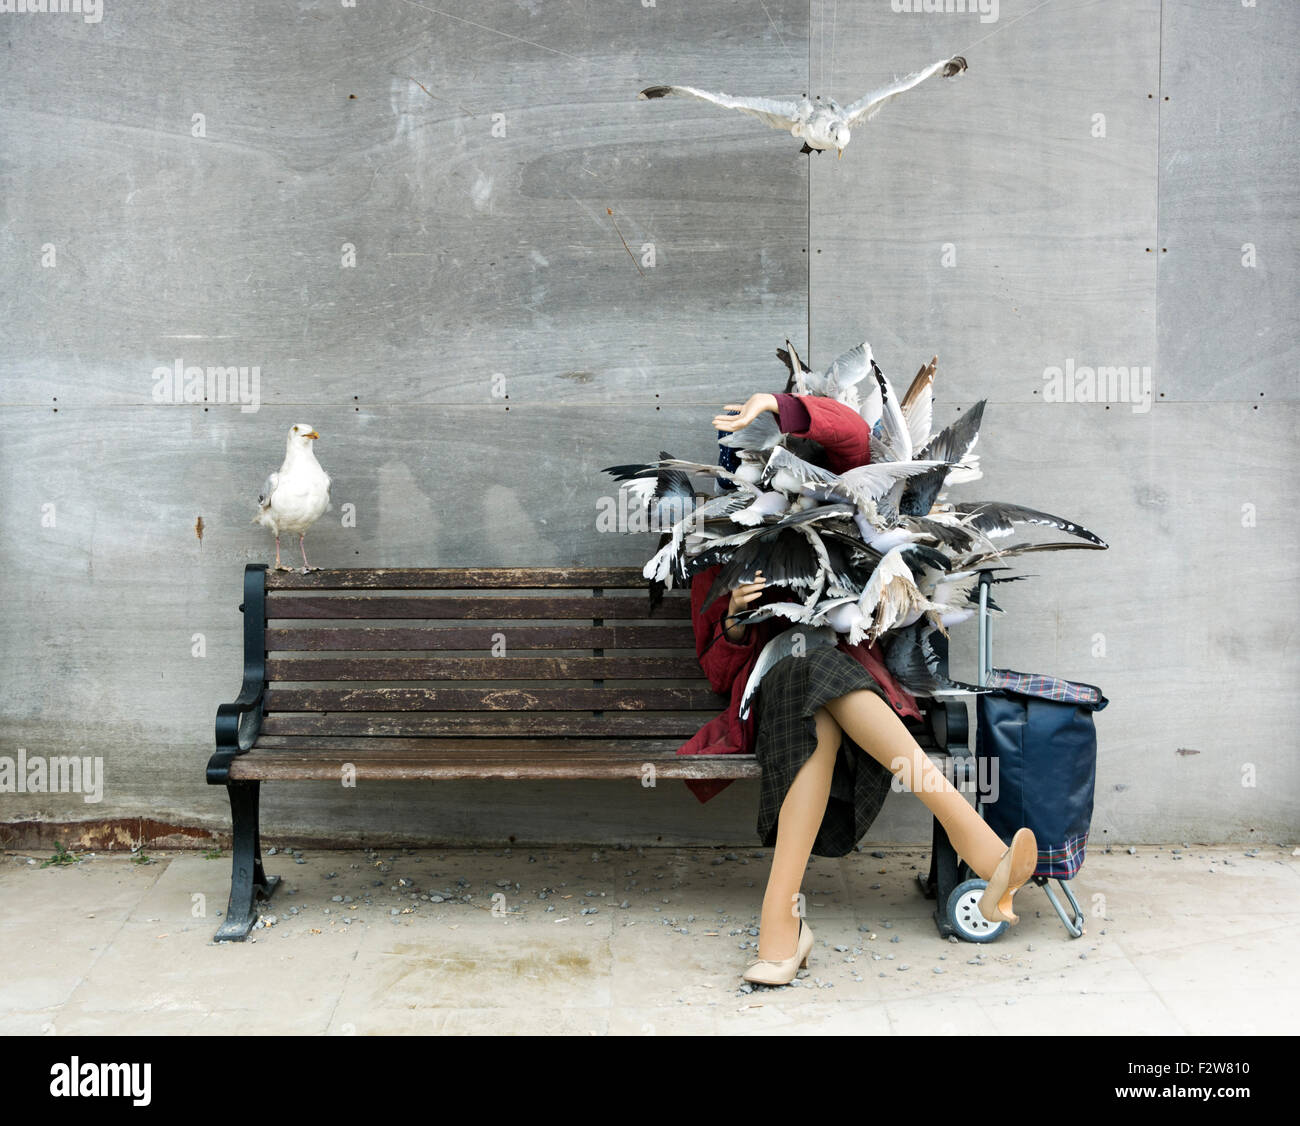 Seagulls attacking lady on a bench, an installation at Banksy's Dismaland. Stock Photo